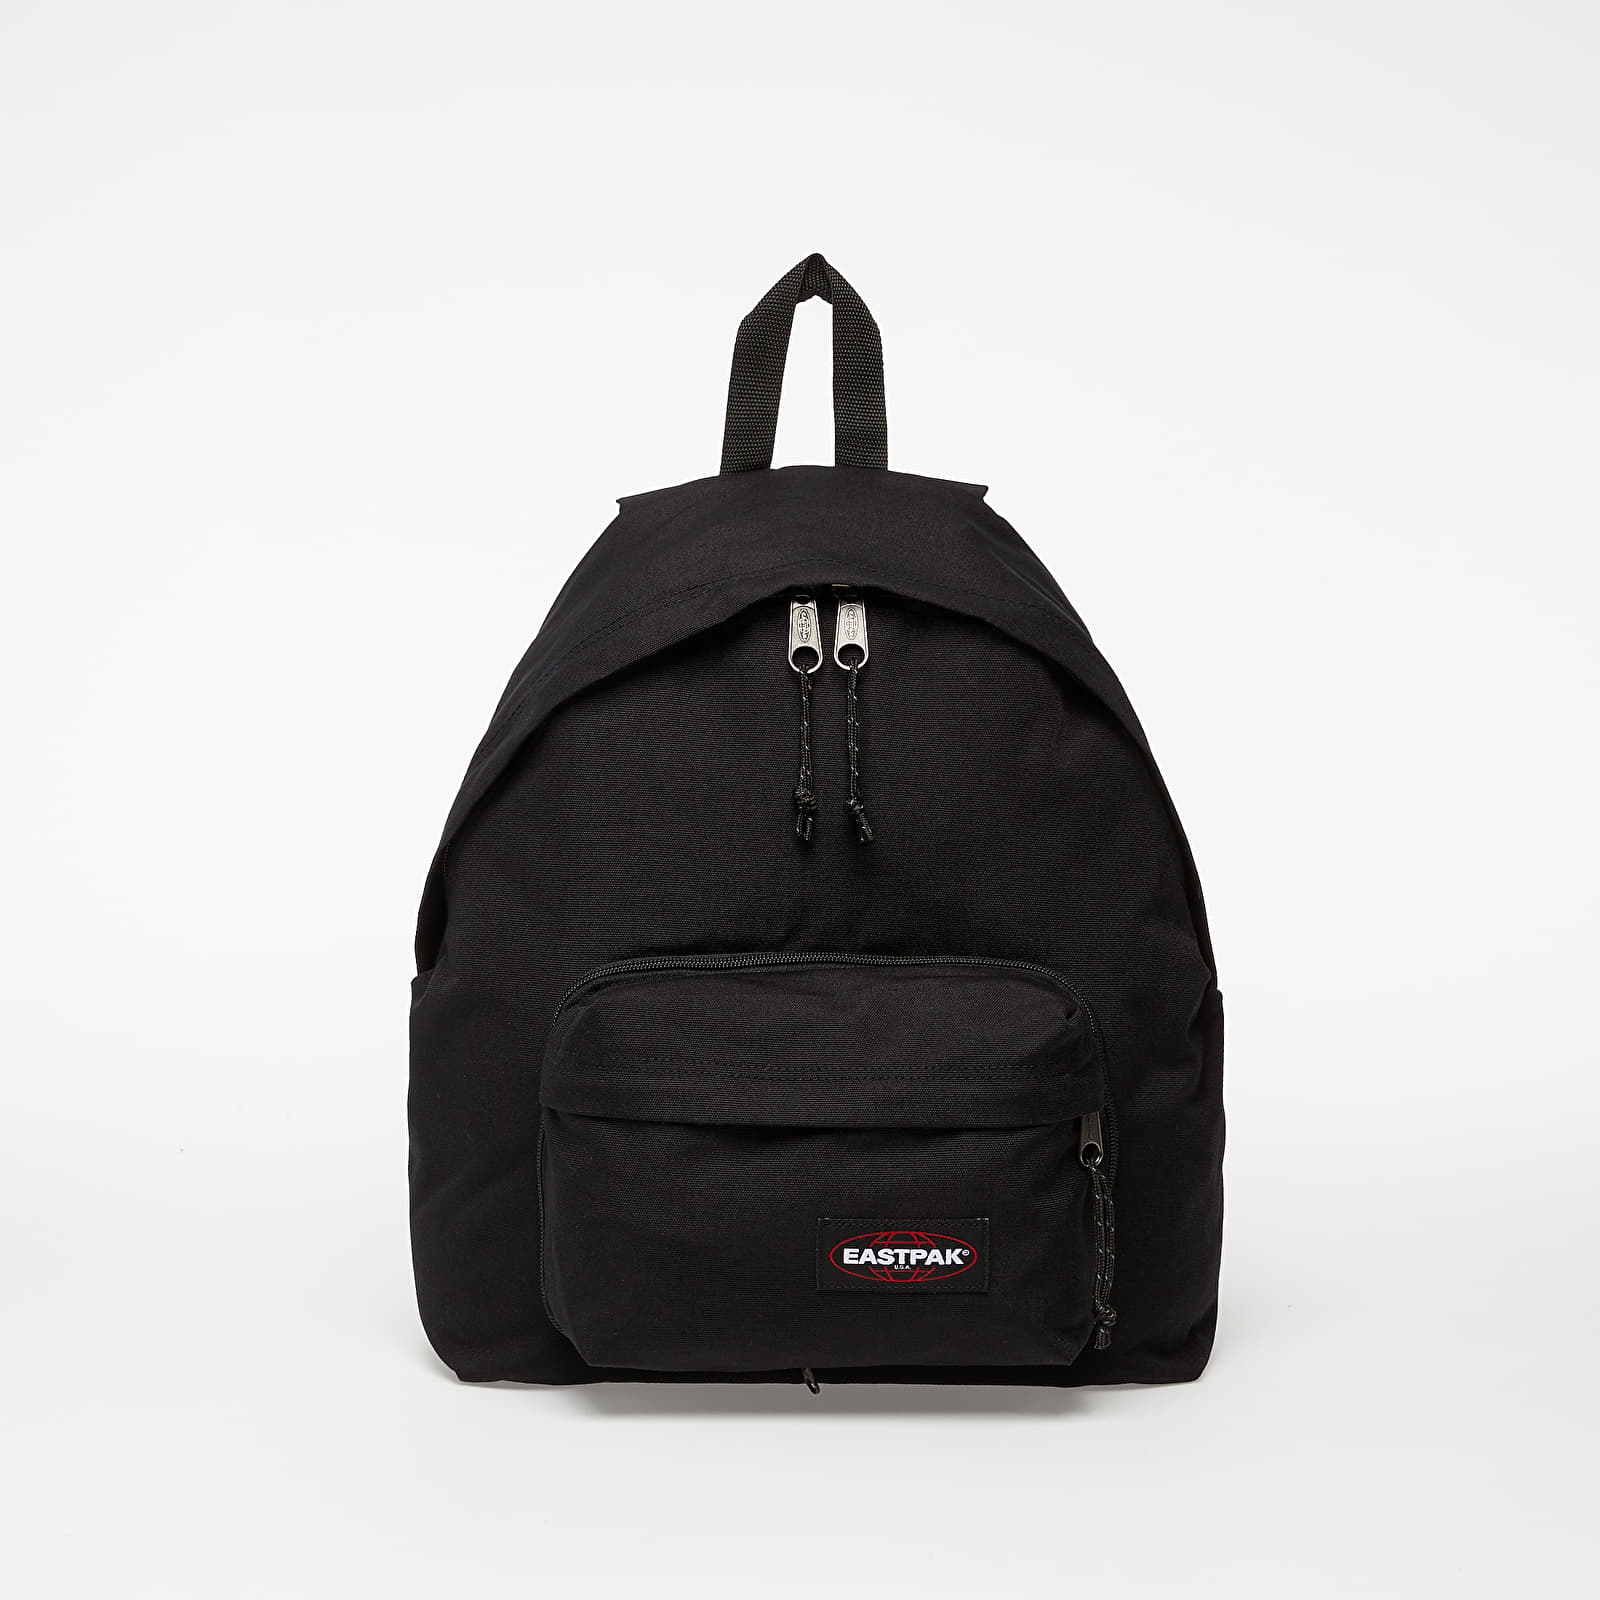 Раници EASTPAK Padded Travell’r Backpack Black 496834